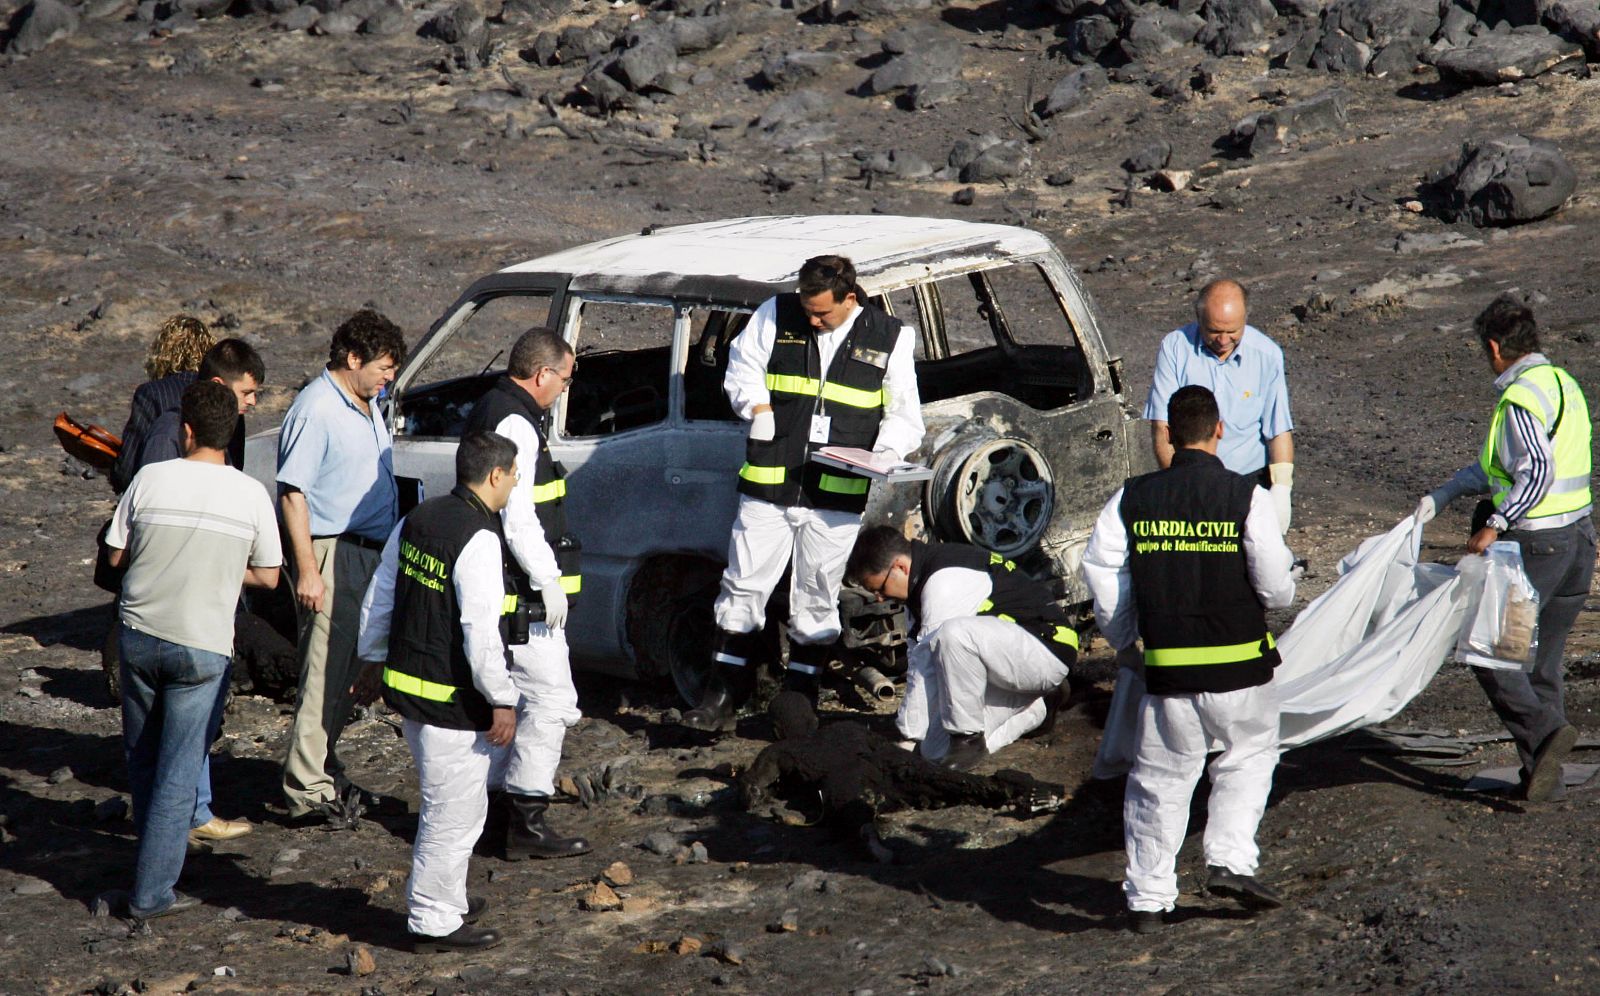 Forensics inspect the blackened corpse of a fire-fighter after deadly forest fire in central Spain.